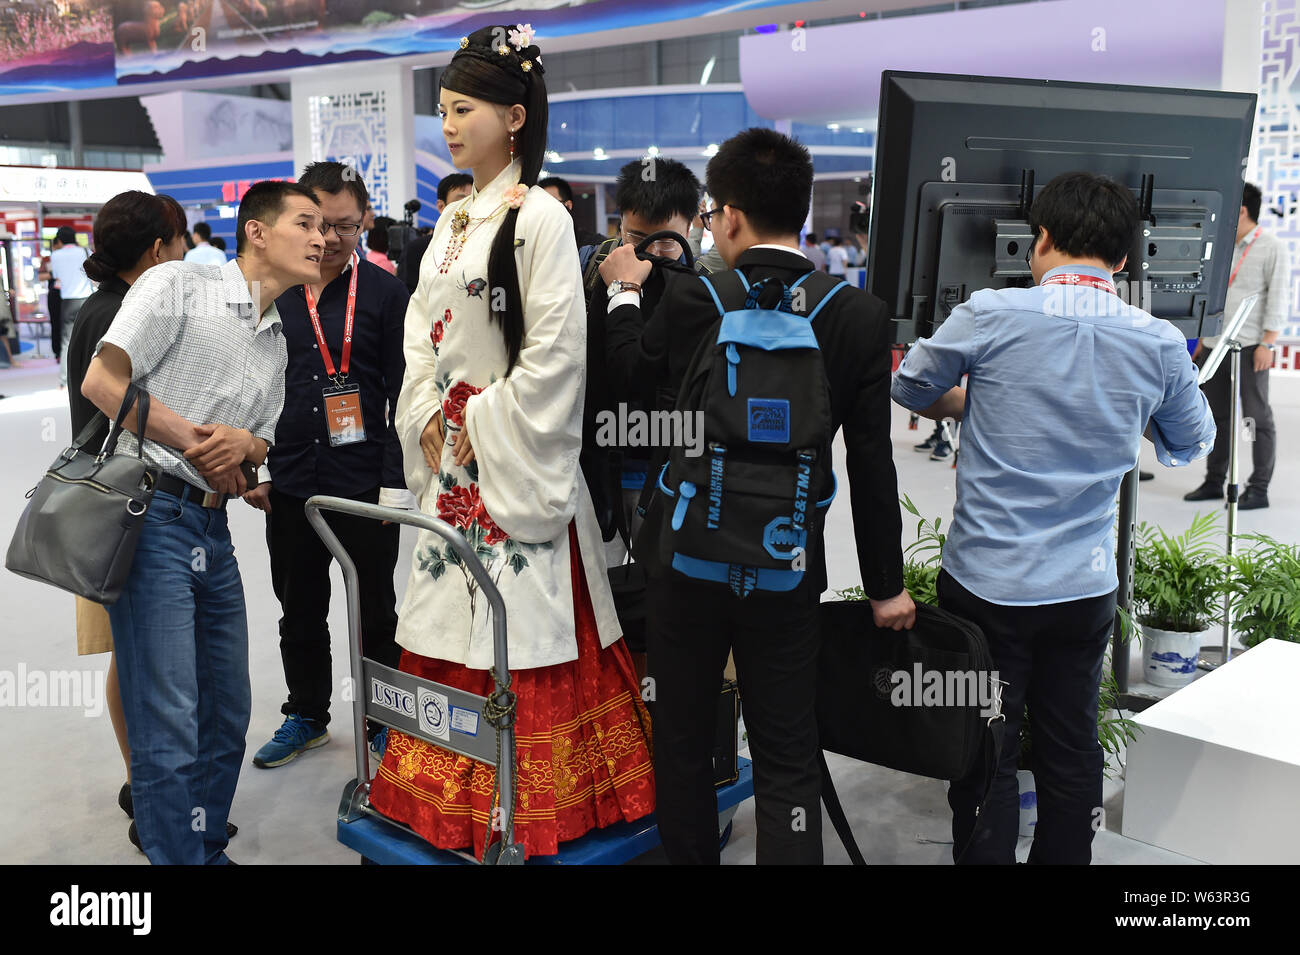 China's first advanced interactive robot Jia Jia interacts with visitors at the 10th Central China Investment and Trade Expo (Central China Expo 2017) Stock Photo